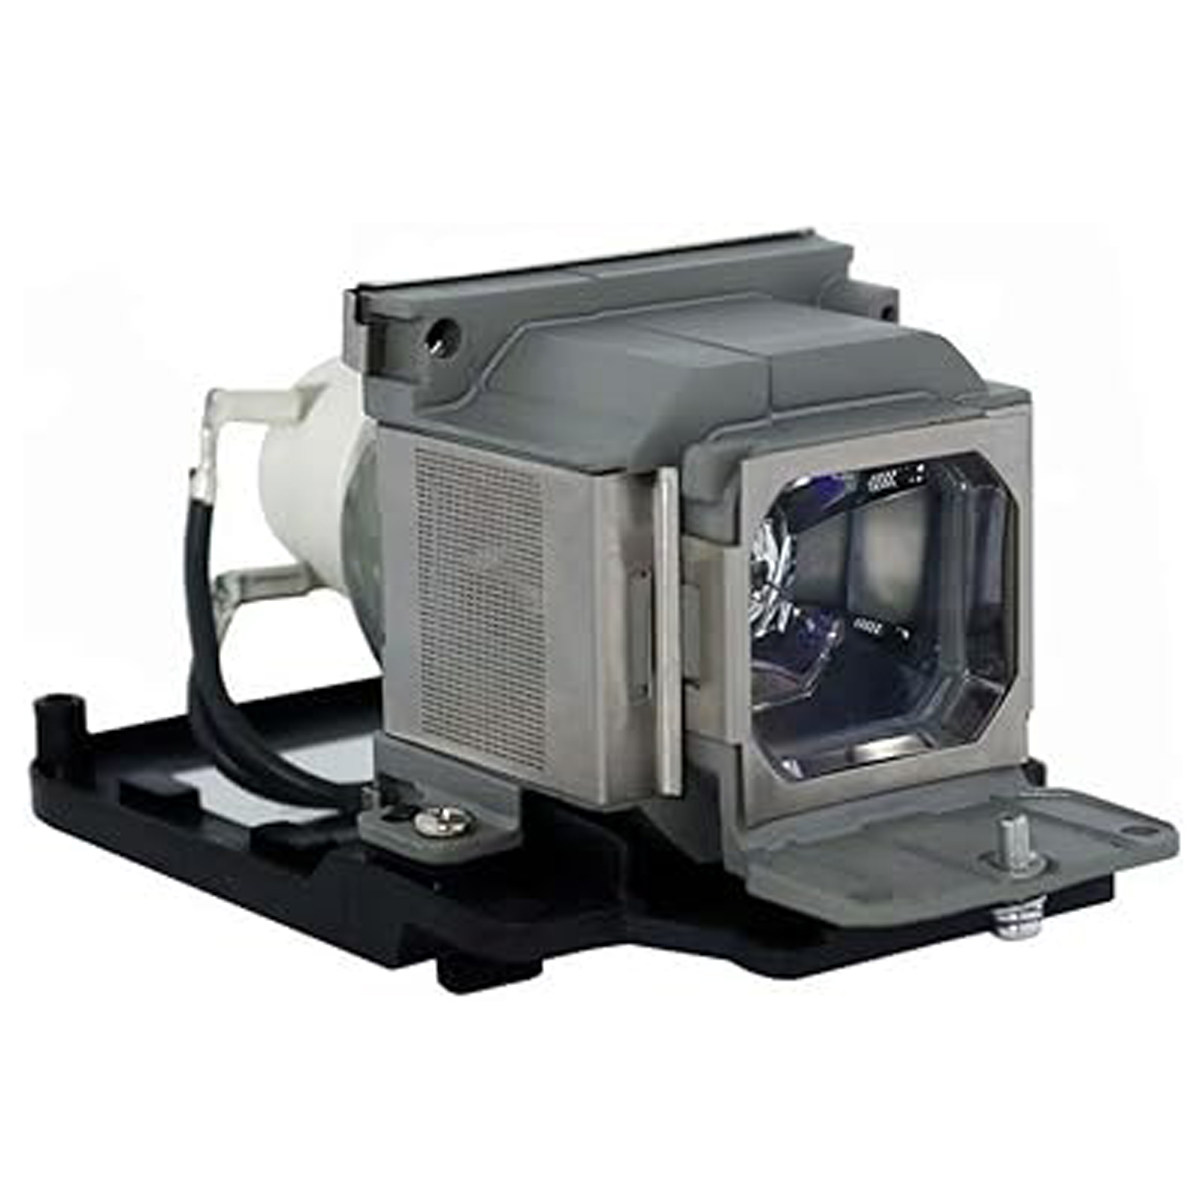 Replacement Projector lamp LMP-E212 For Sony VPL EW225 VPL EW235 VPL EW245 VPL EW255